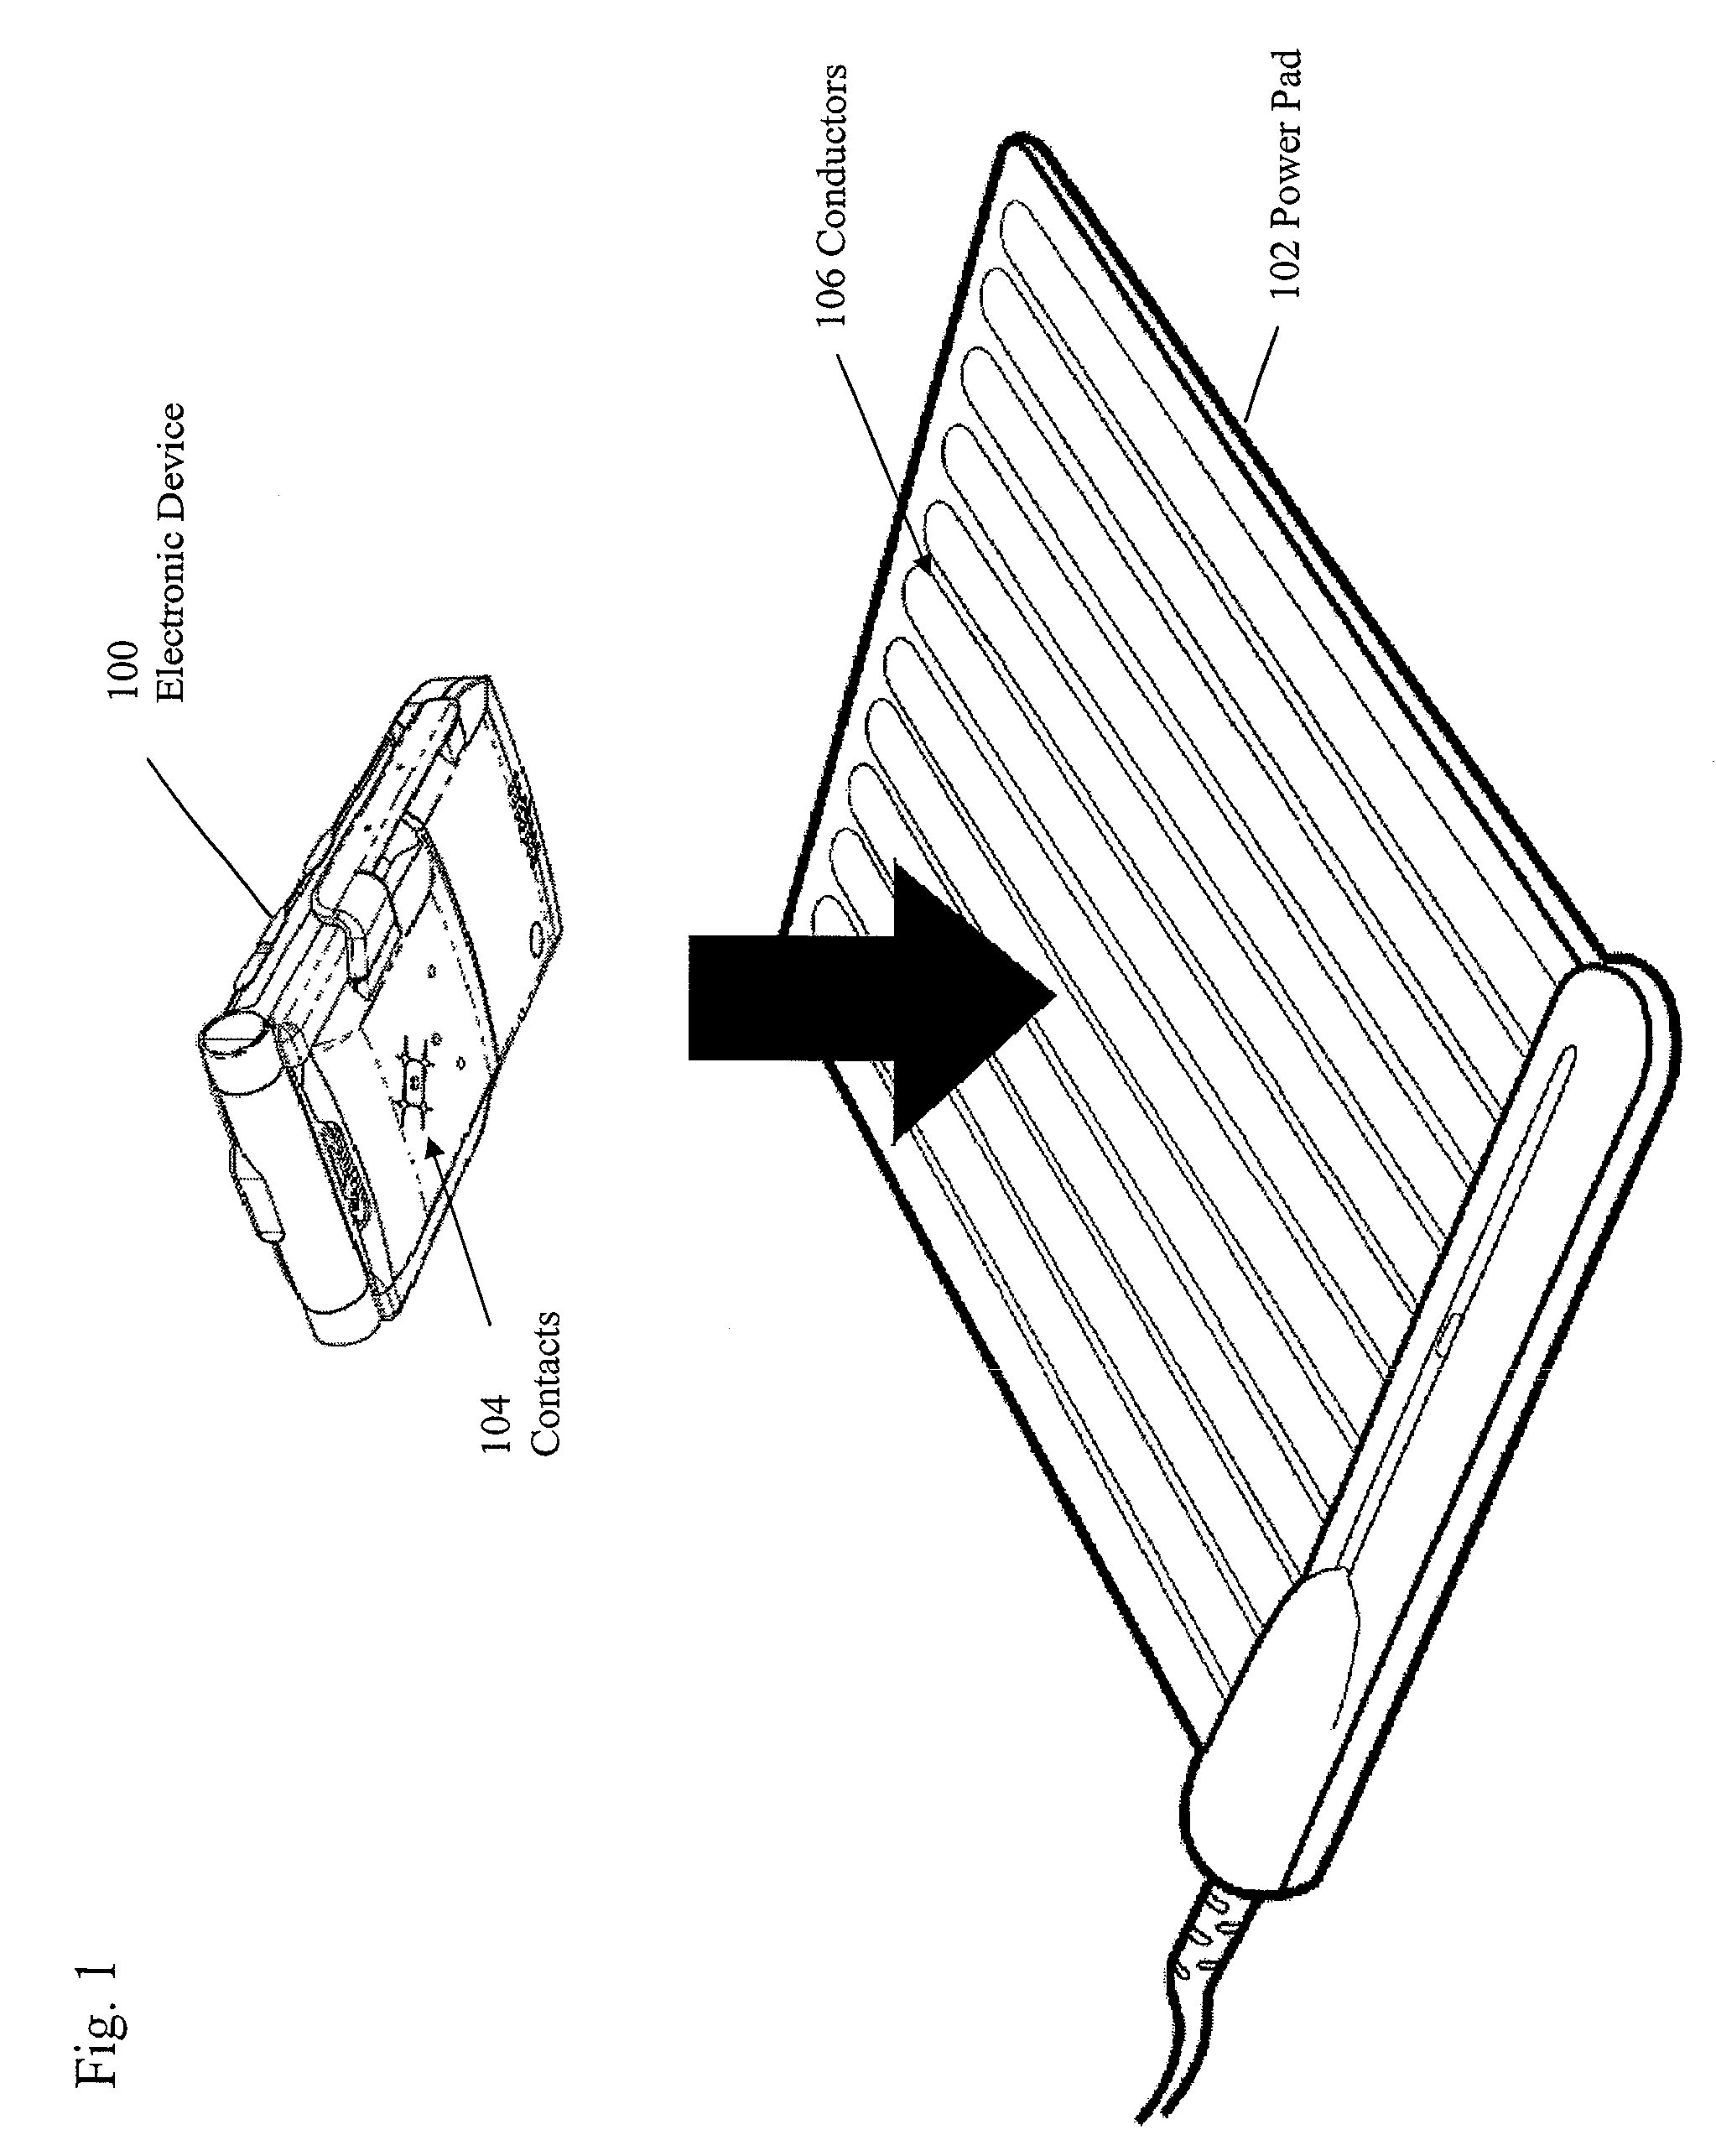 Protection of exposed contacts connected to a bridge rectifier against electrostatic discharge